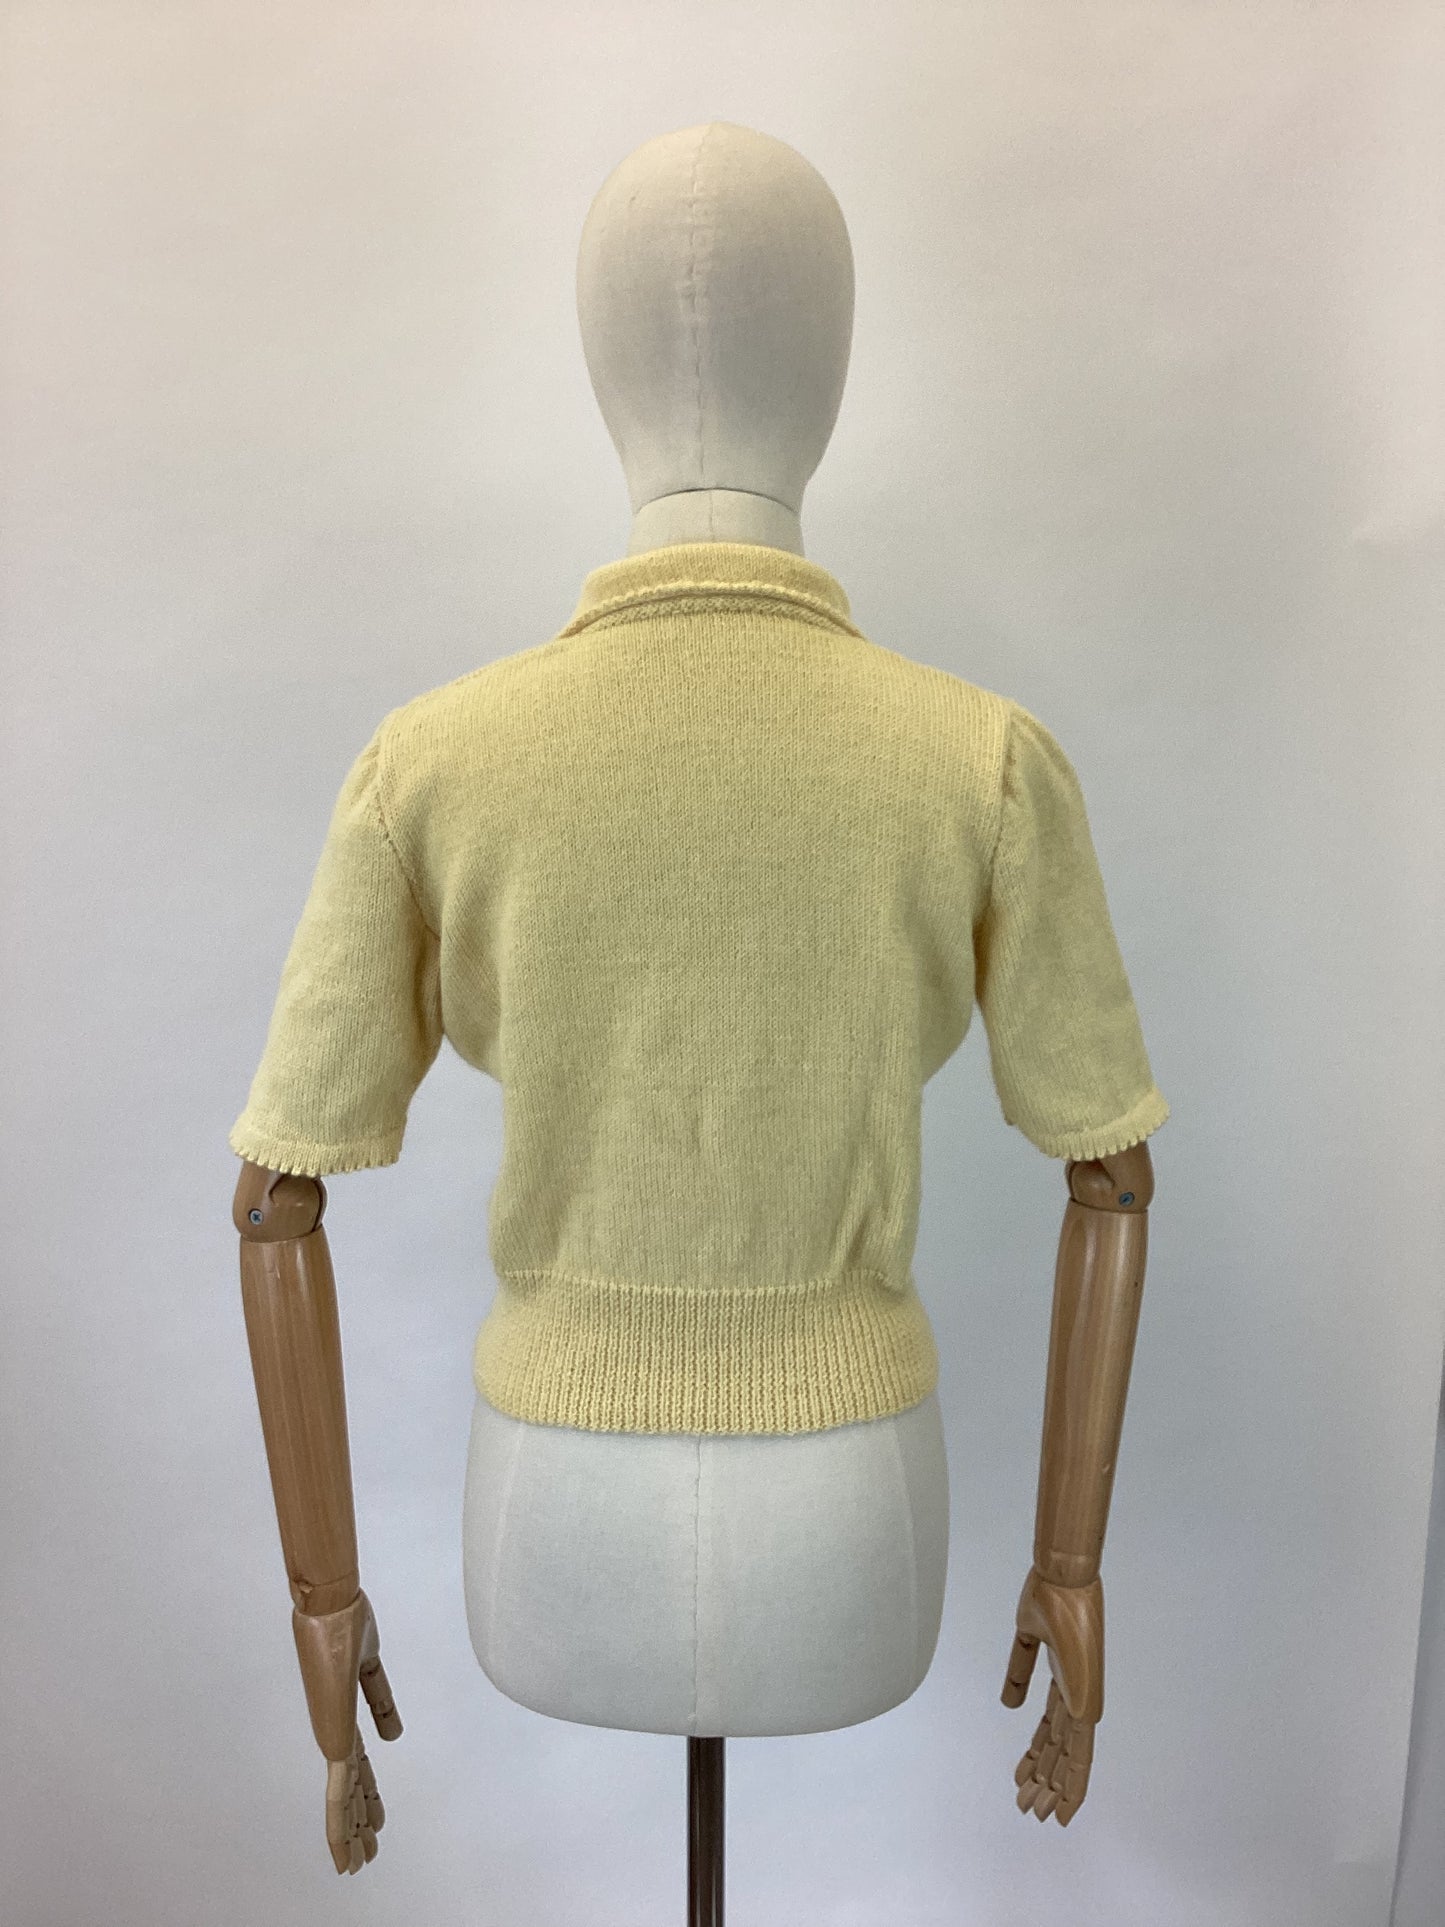 1940's Reproduction style knitted jumper - in pale lemon